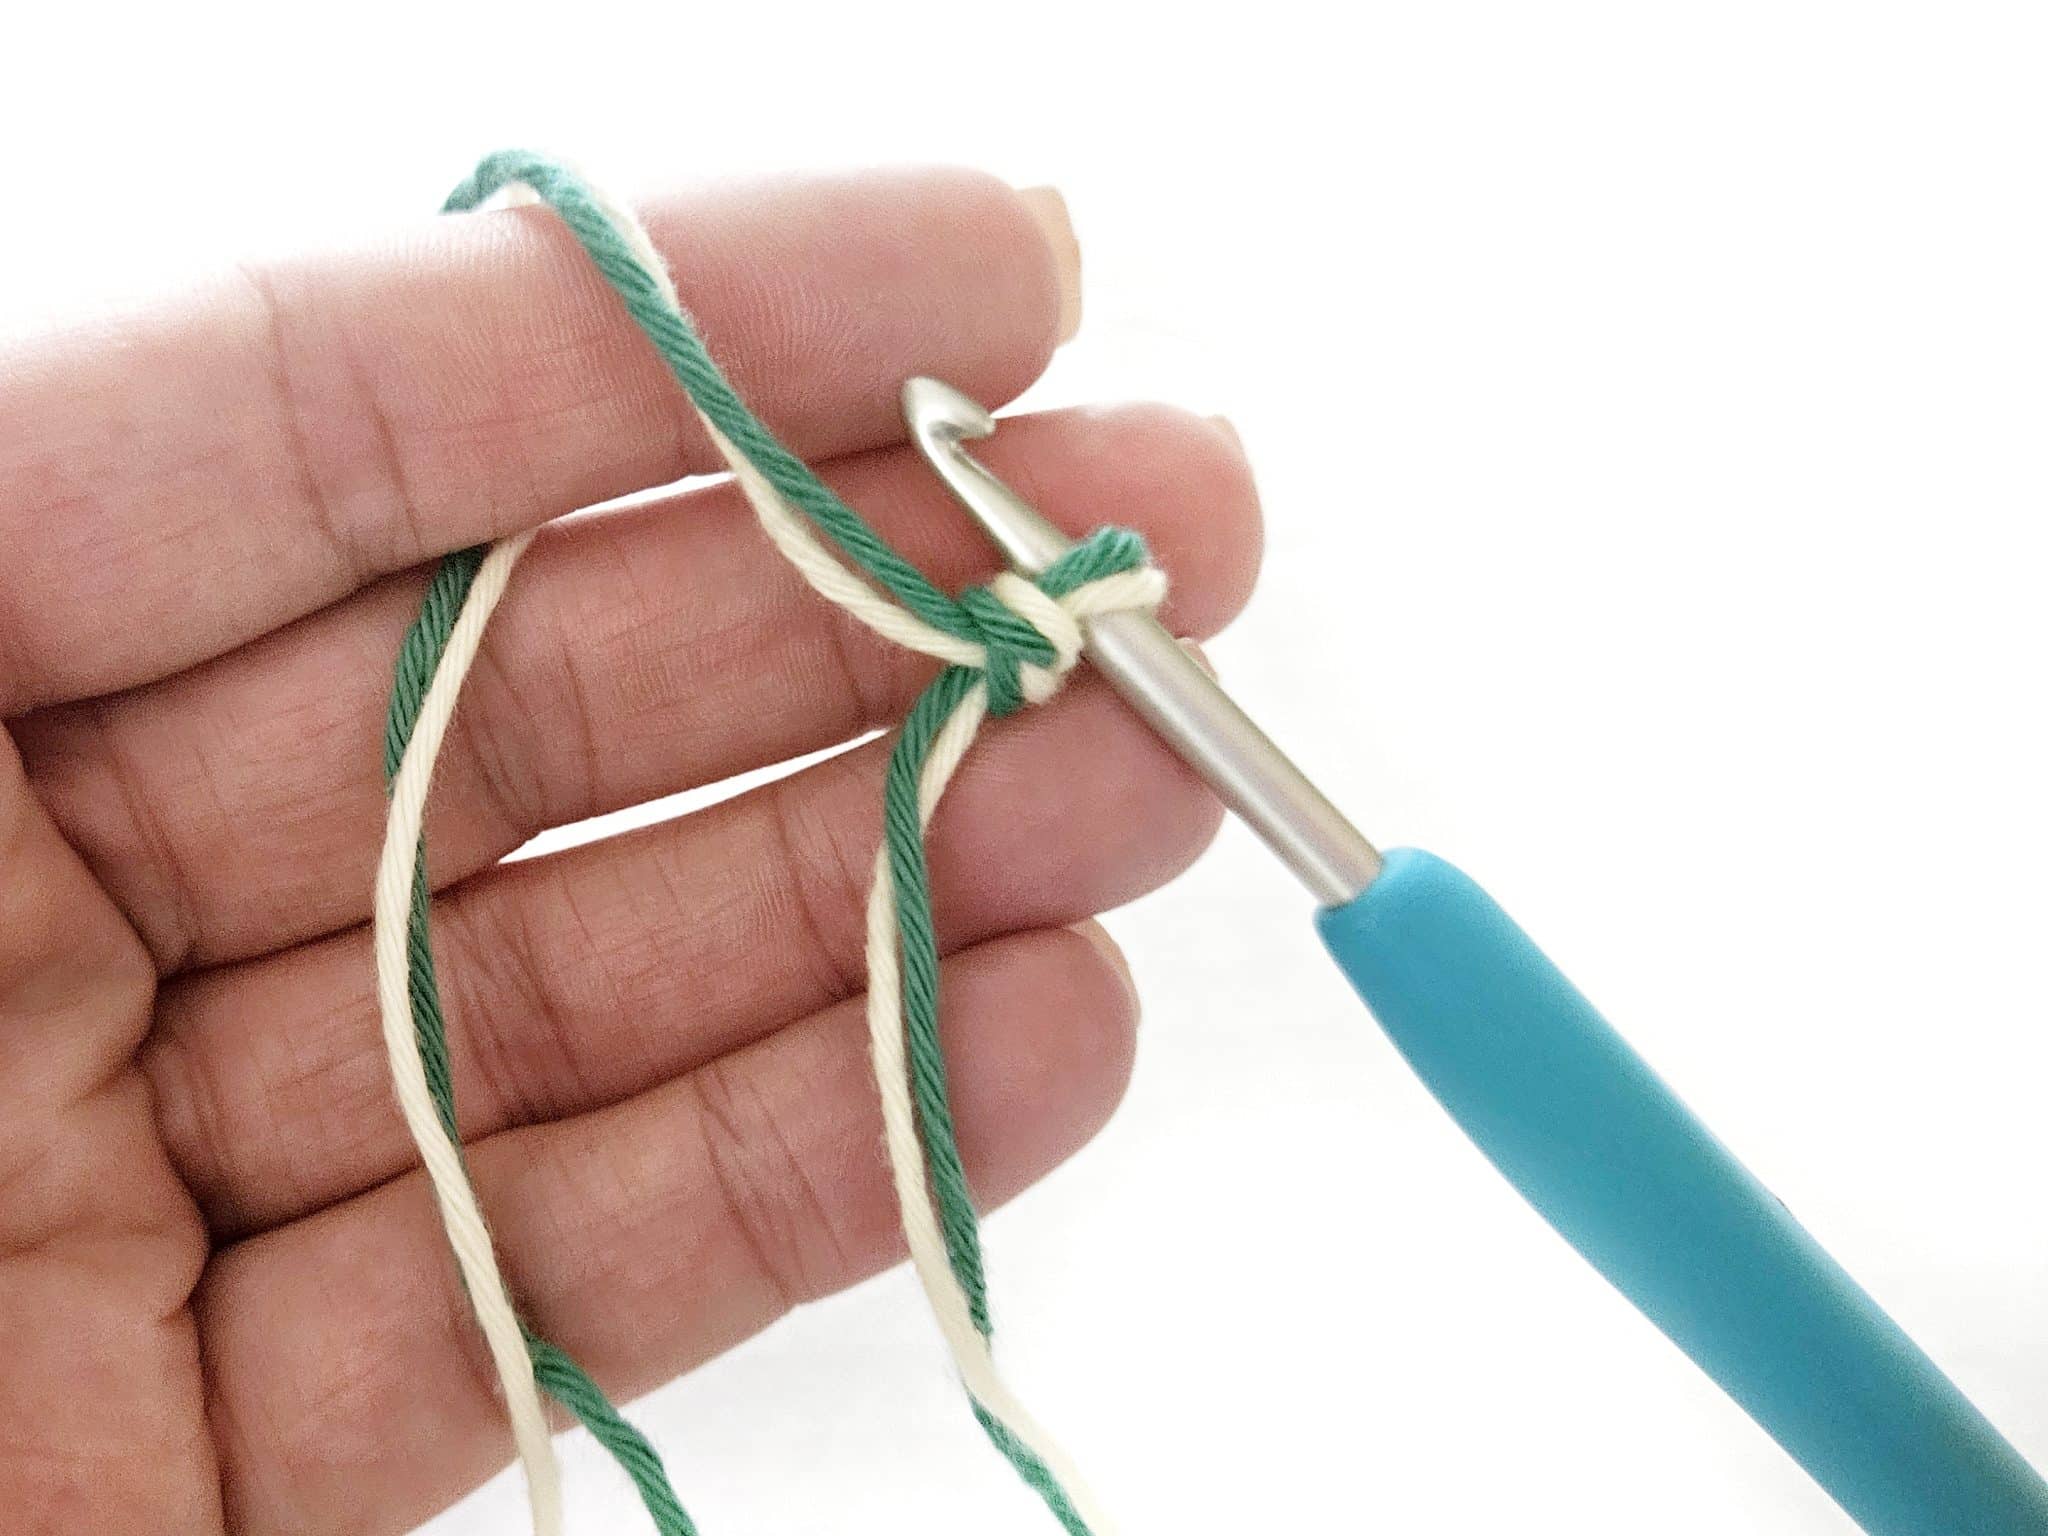 How to Hold Yarn Double Using Two Strands from One Skein